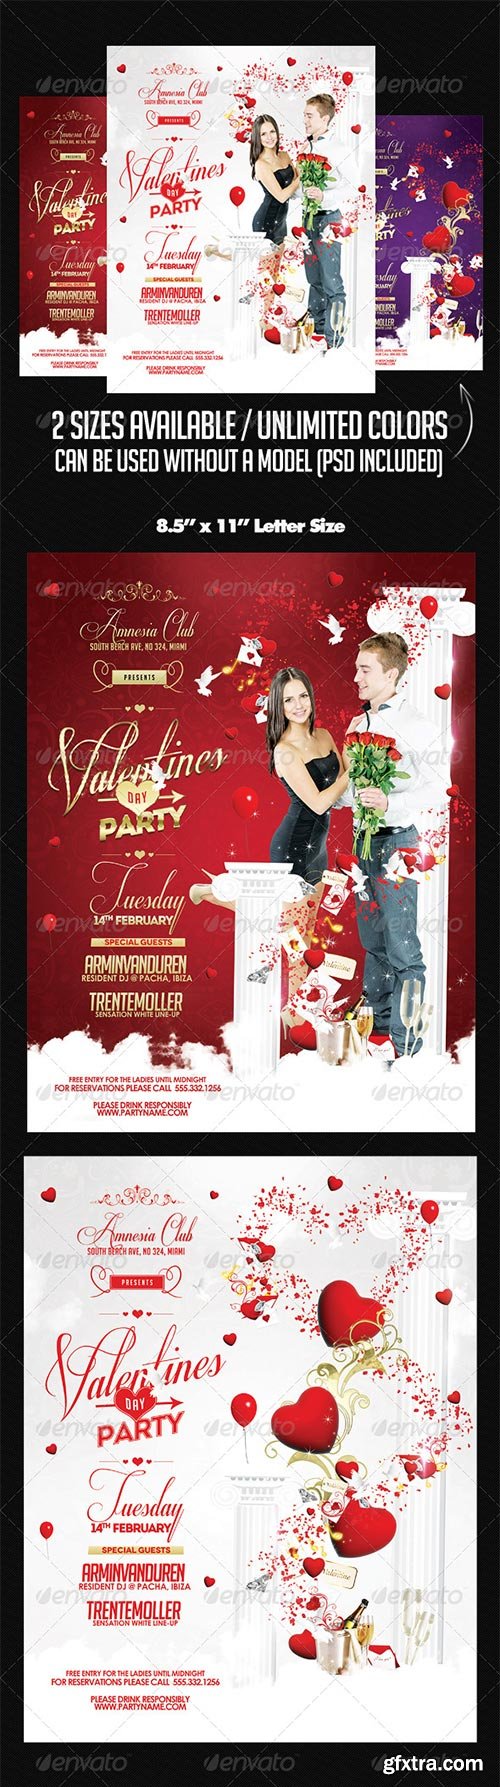 GraphicRiver - Valentines Party 6507854